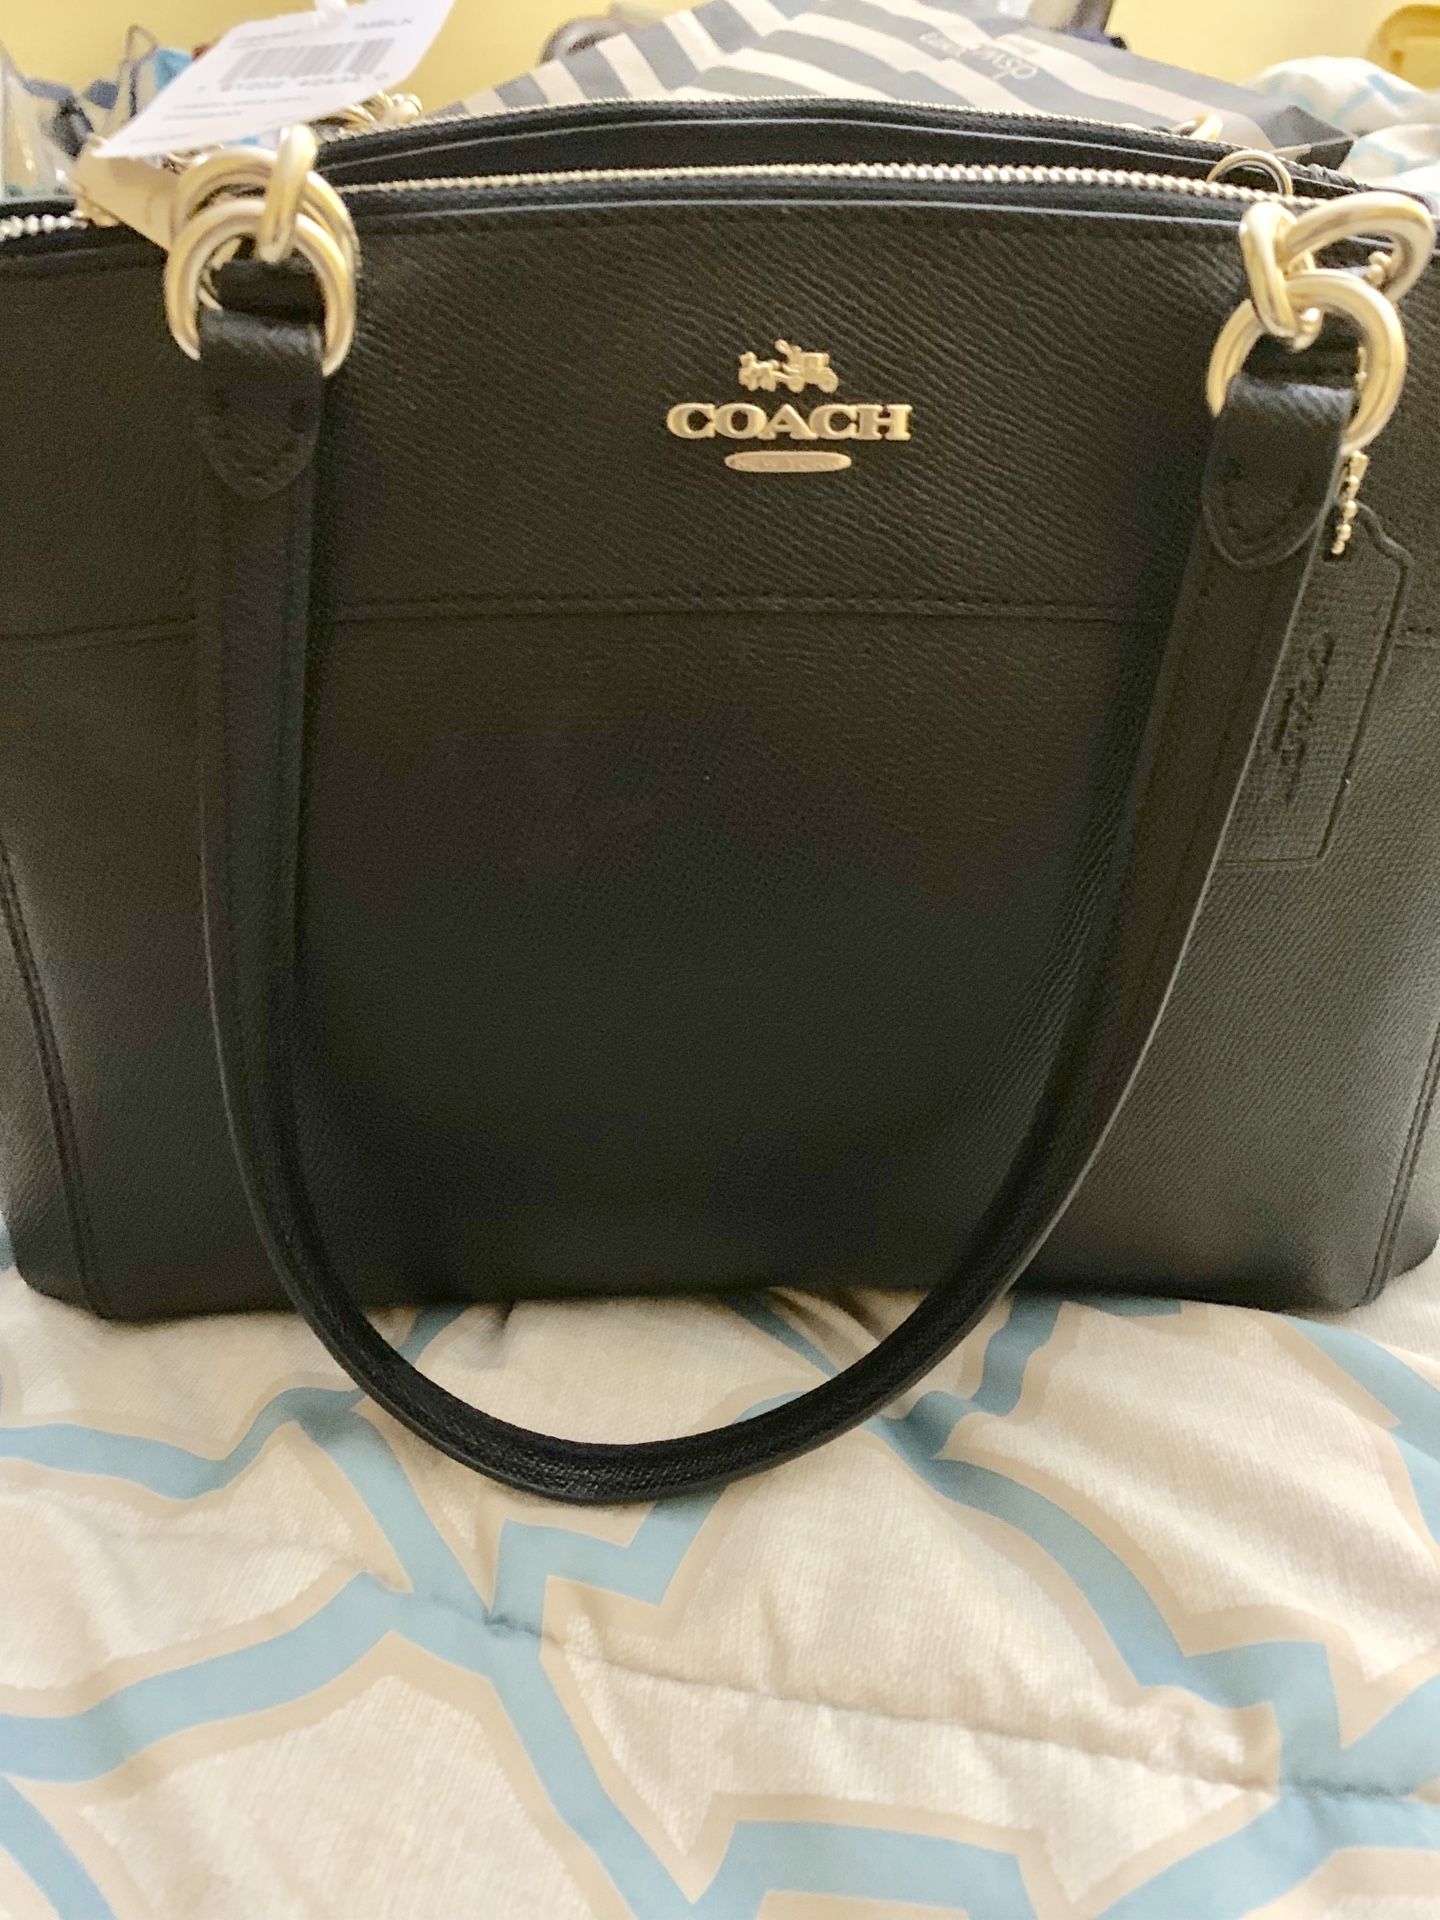 Coach New With tags Bag